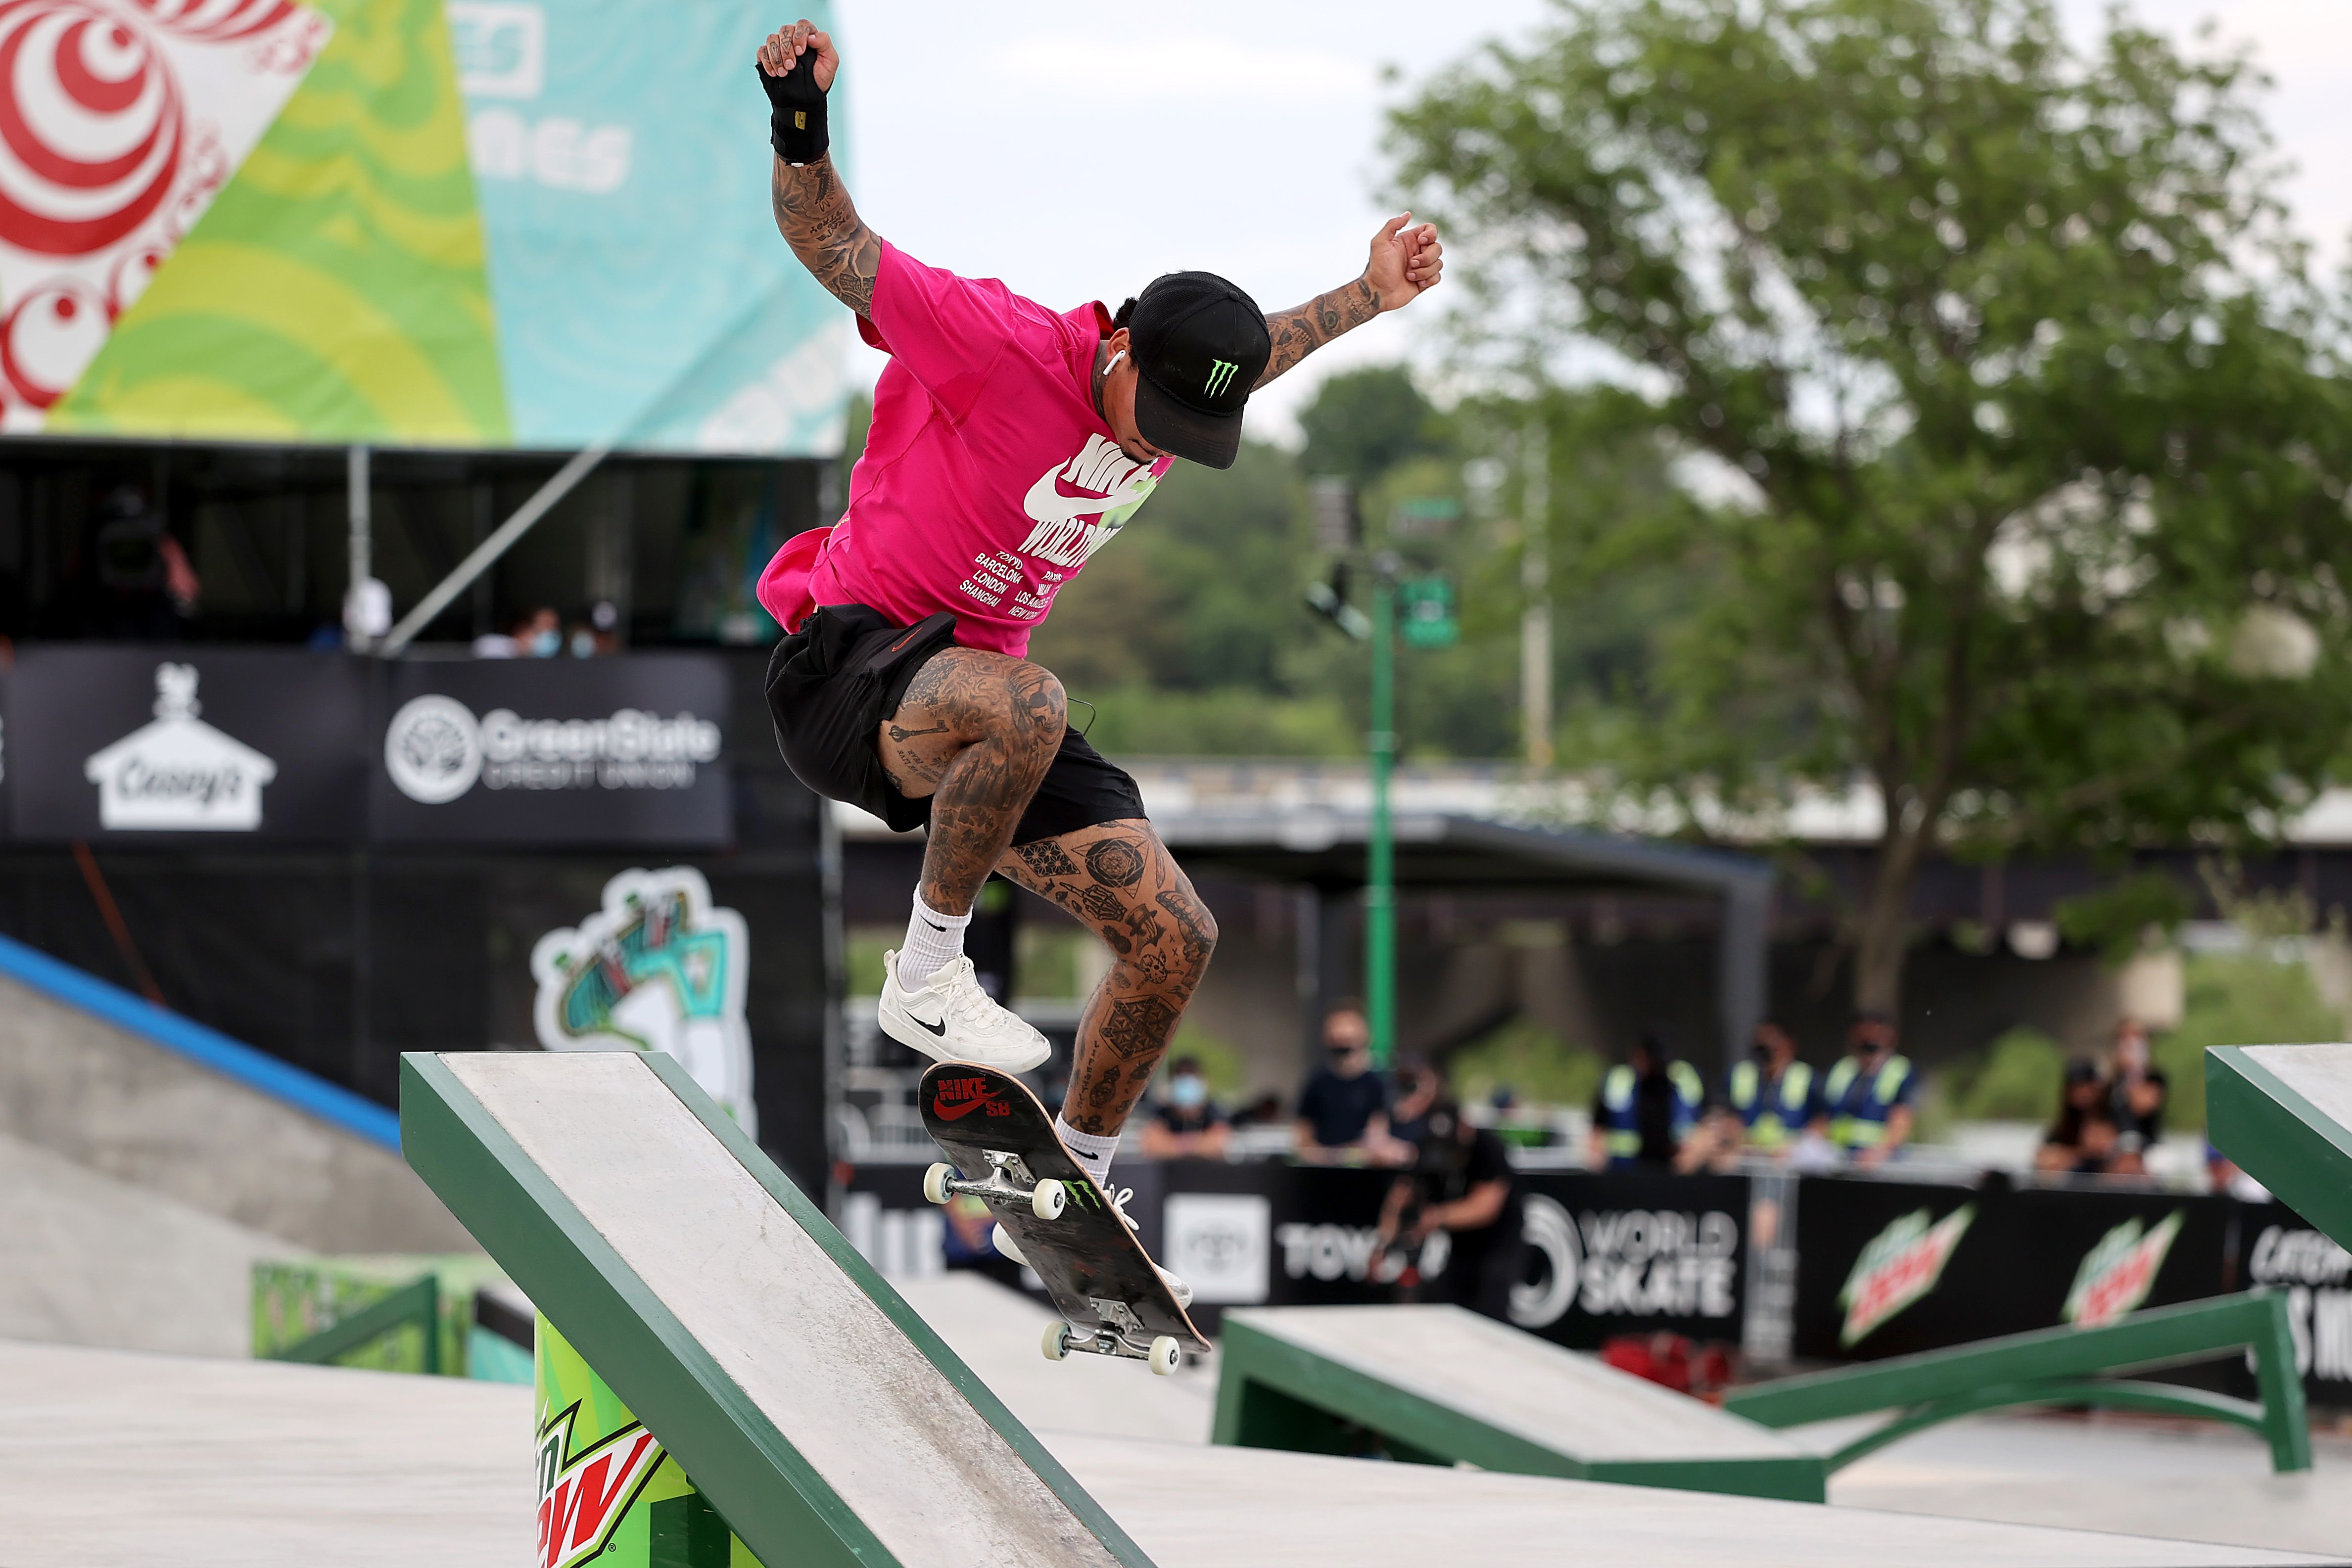 Nyjah Huston competes during the Men's Street Final at the Dew Tour on May 23, 2021 in Des Moines, Iowa. (Photo by Sean M. Haffey/Getty Images)